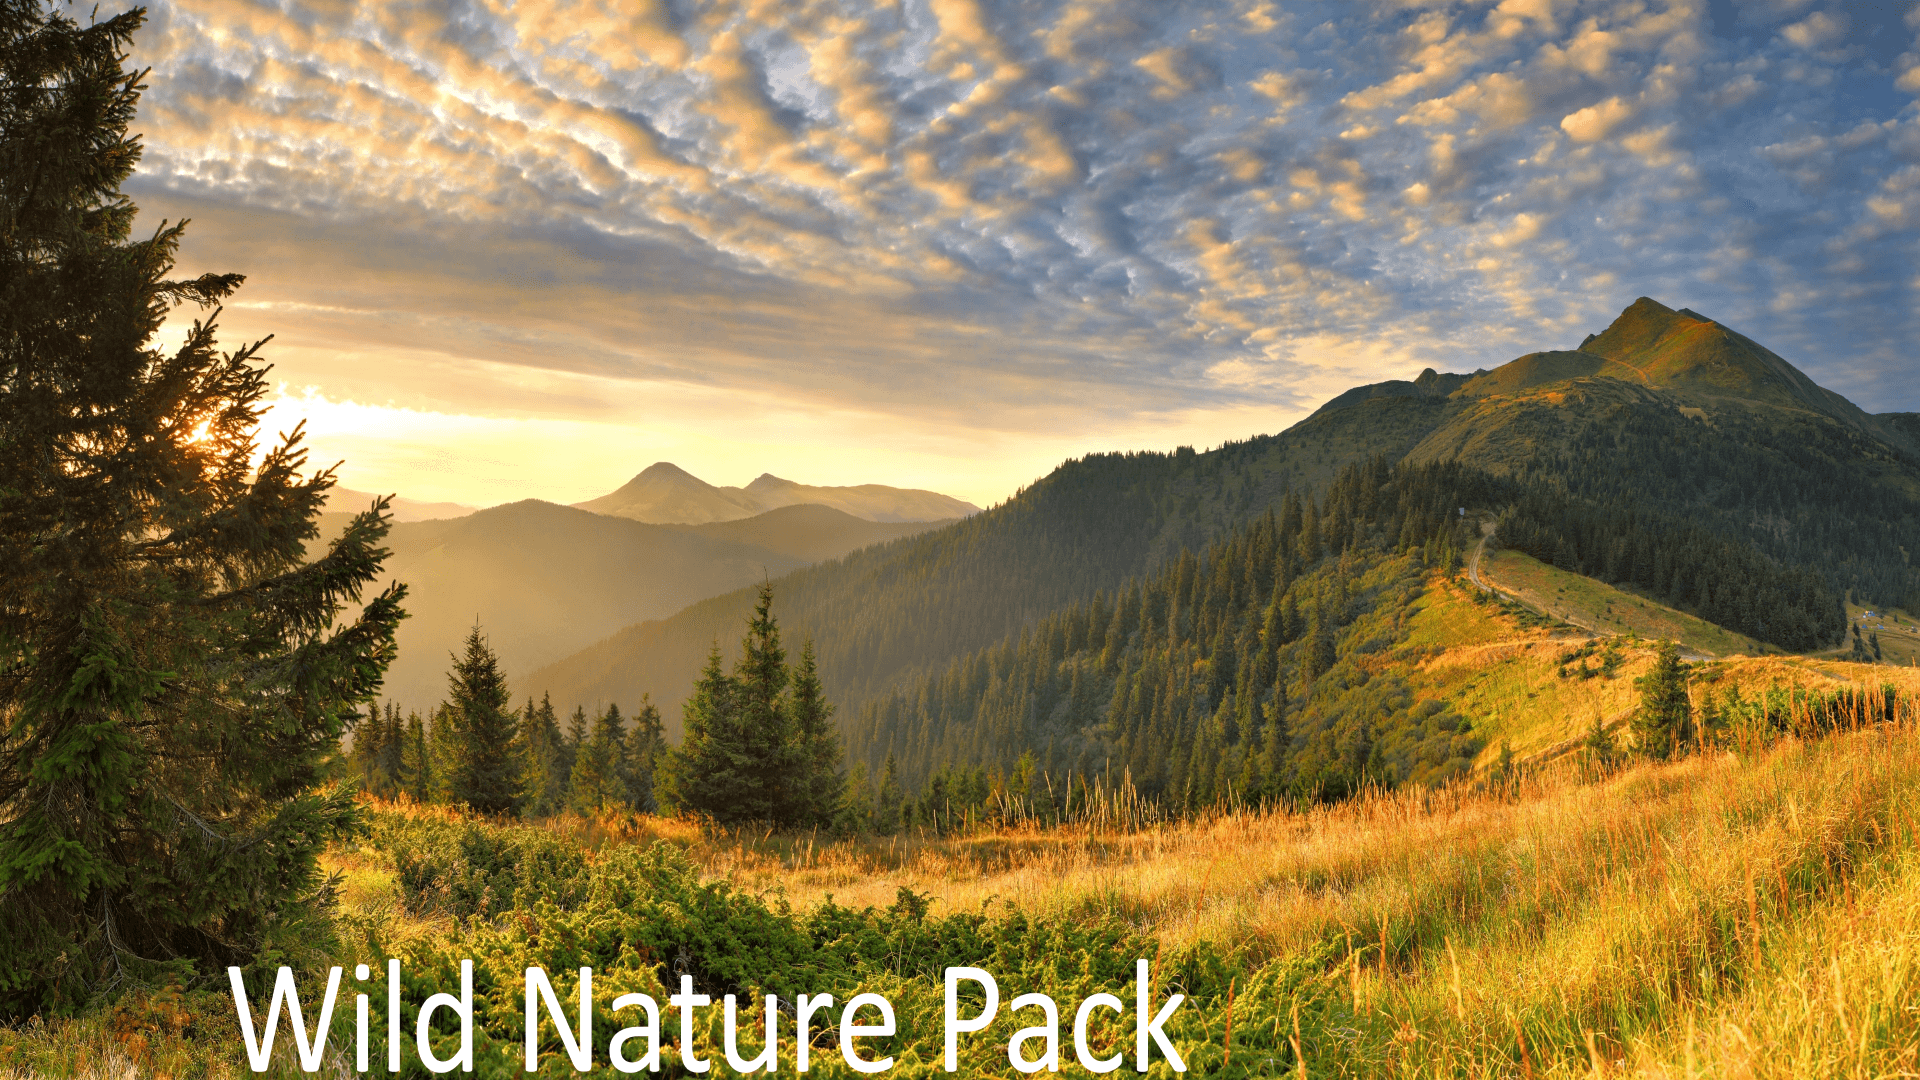 Wild Nature Pack by Andreas Engebretsen in Sound FX - UE4 Marketplace